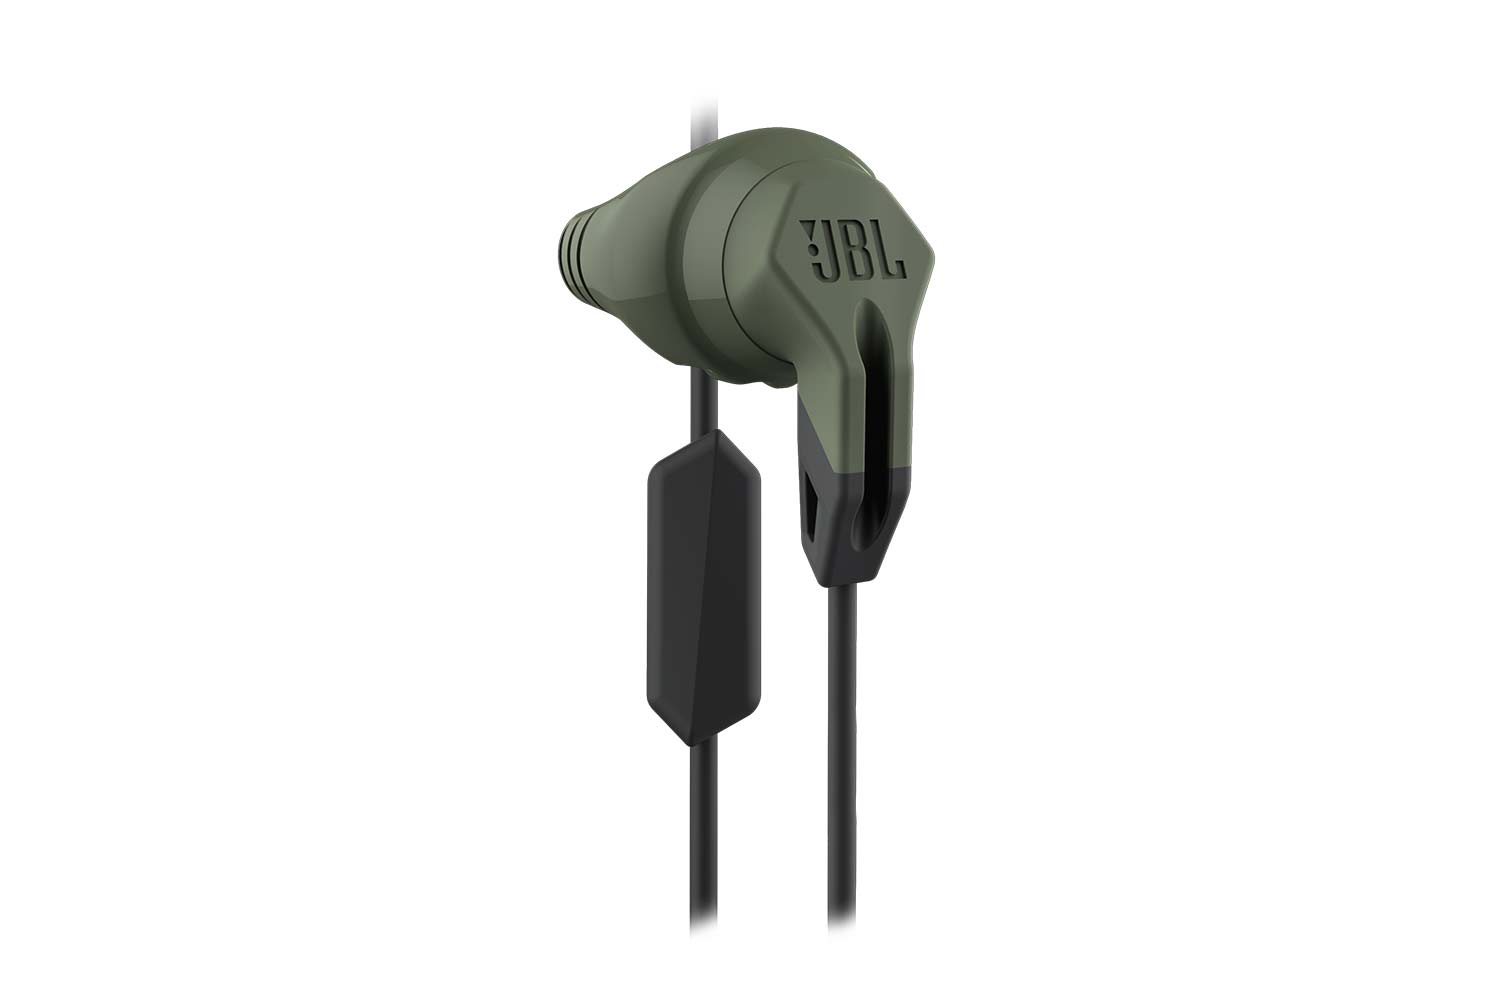 jbl new headphones ifa everest reflect grip noise cancelling bluetooth small 200 olive